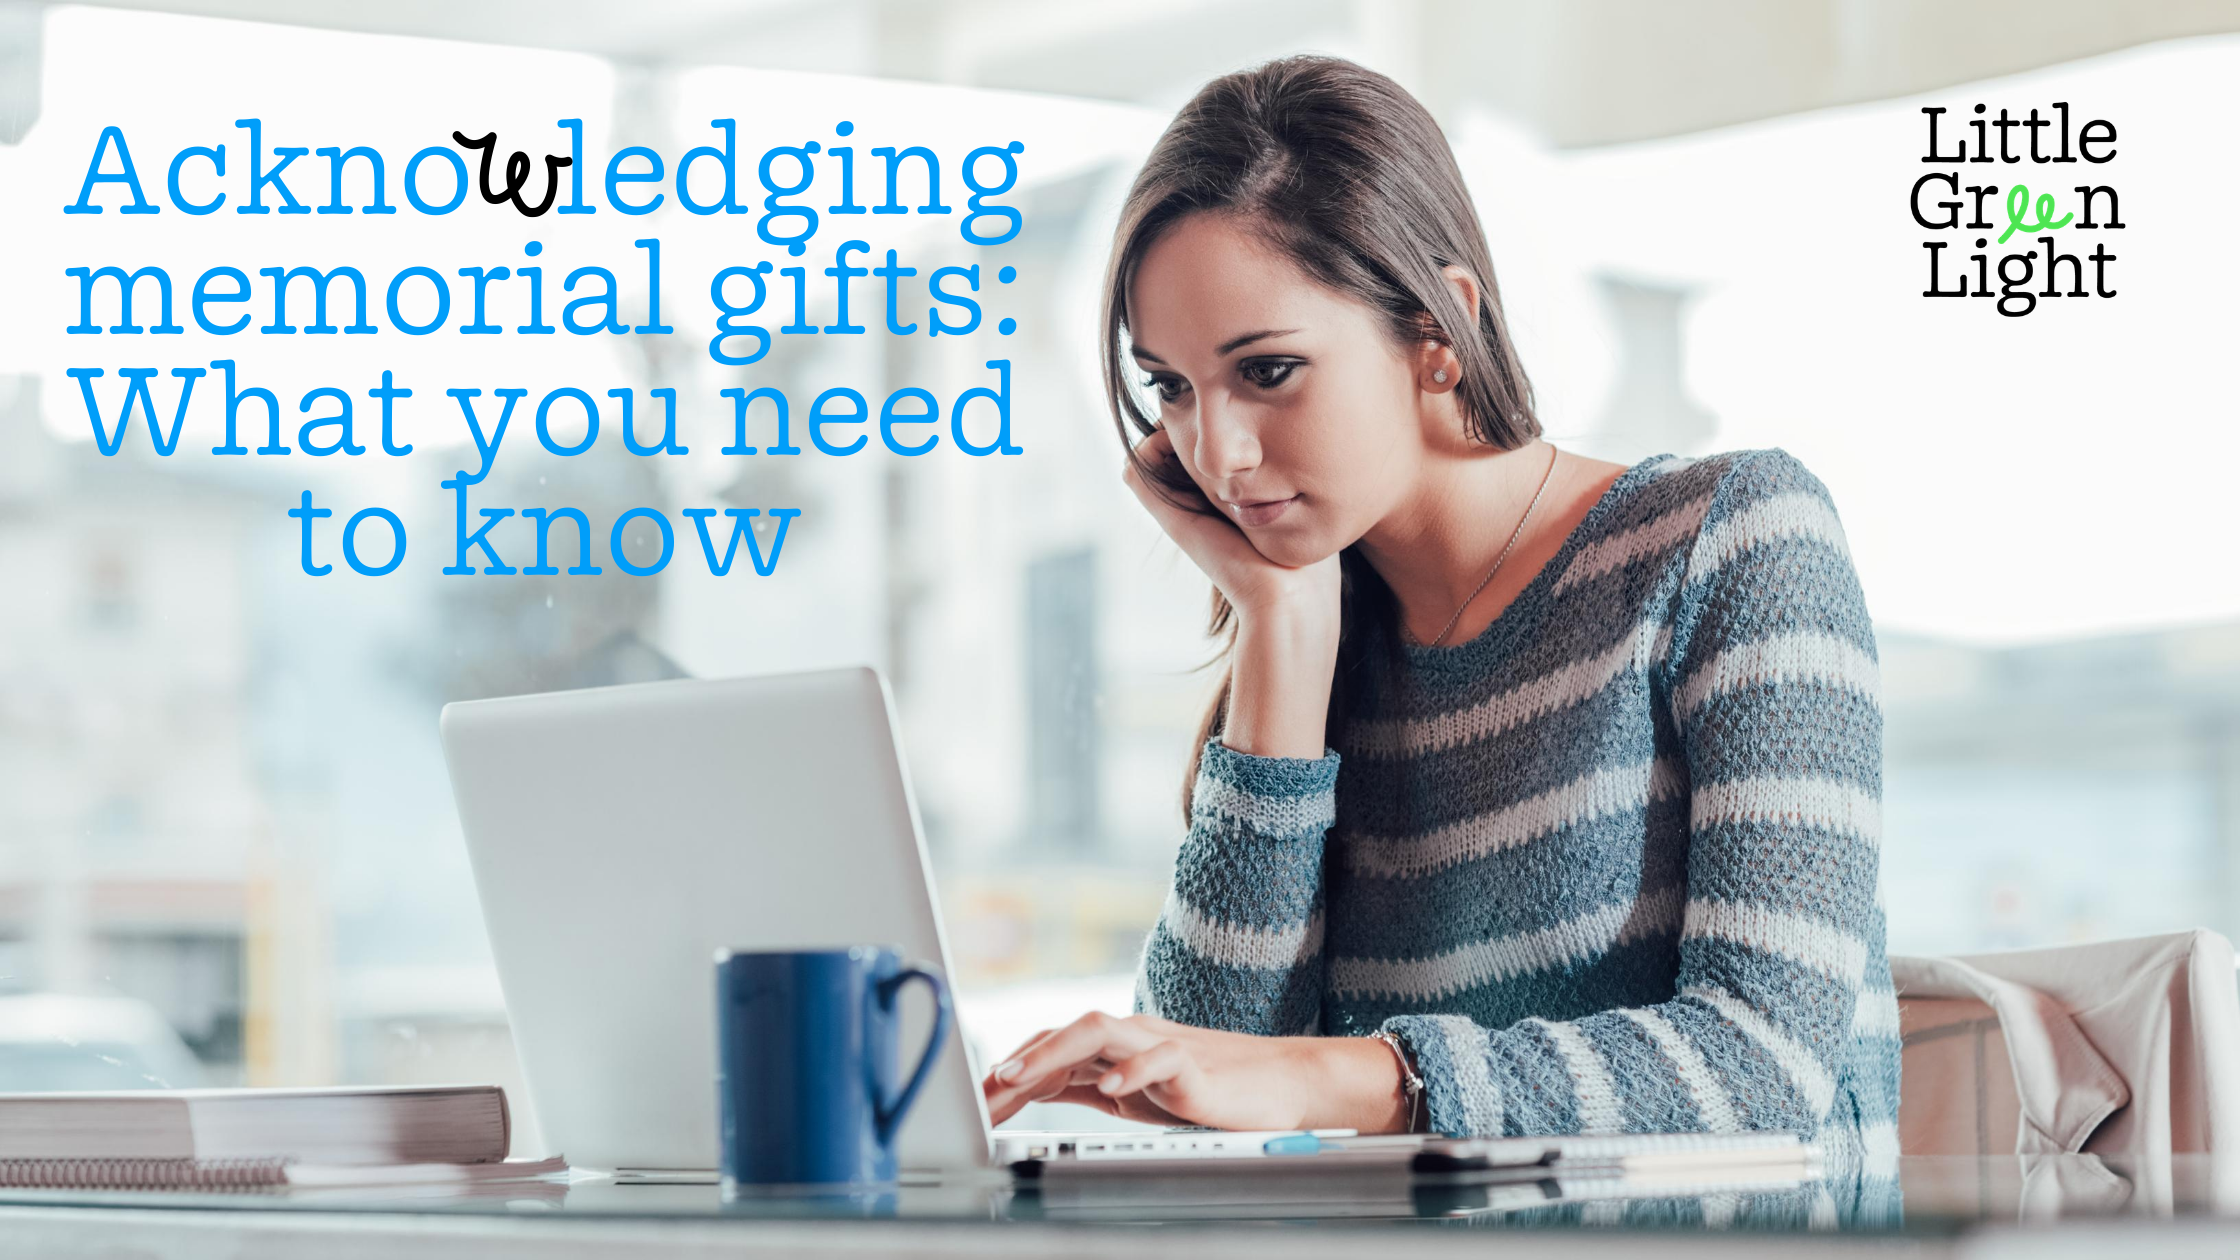 How to acknowledge memorial gifts